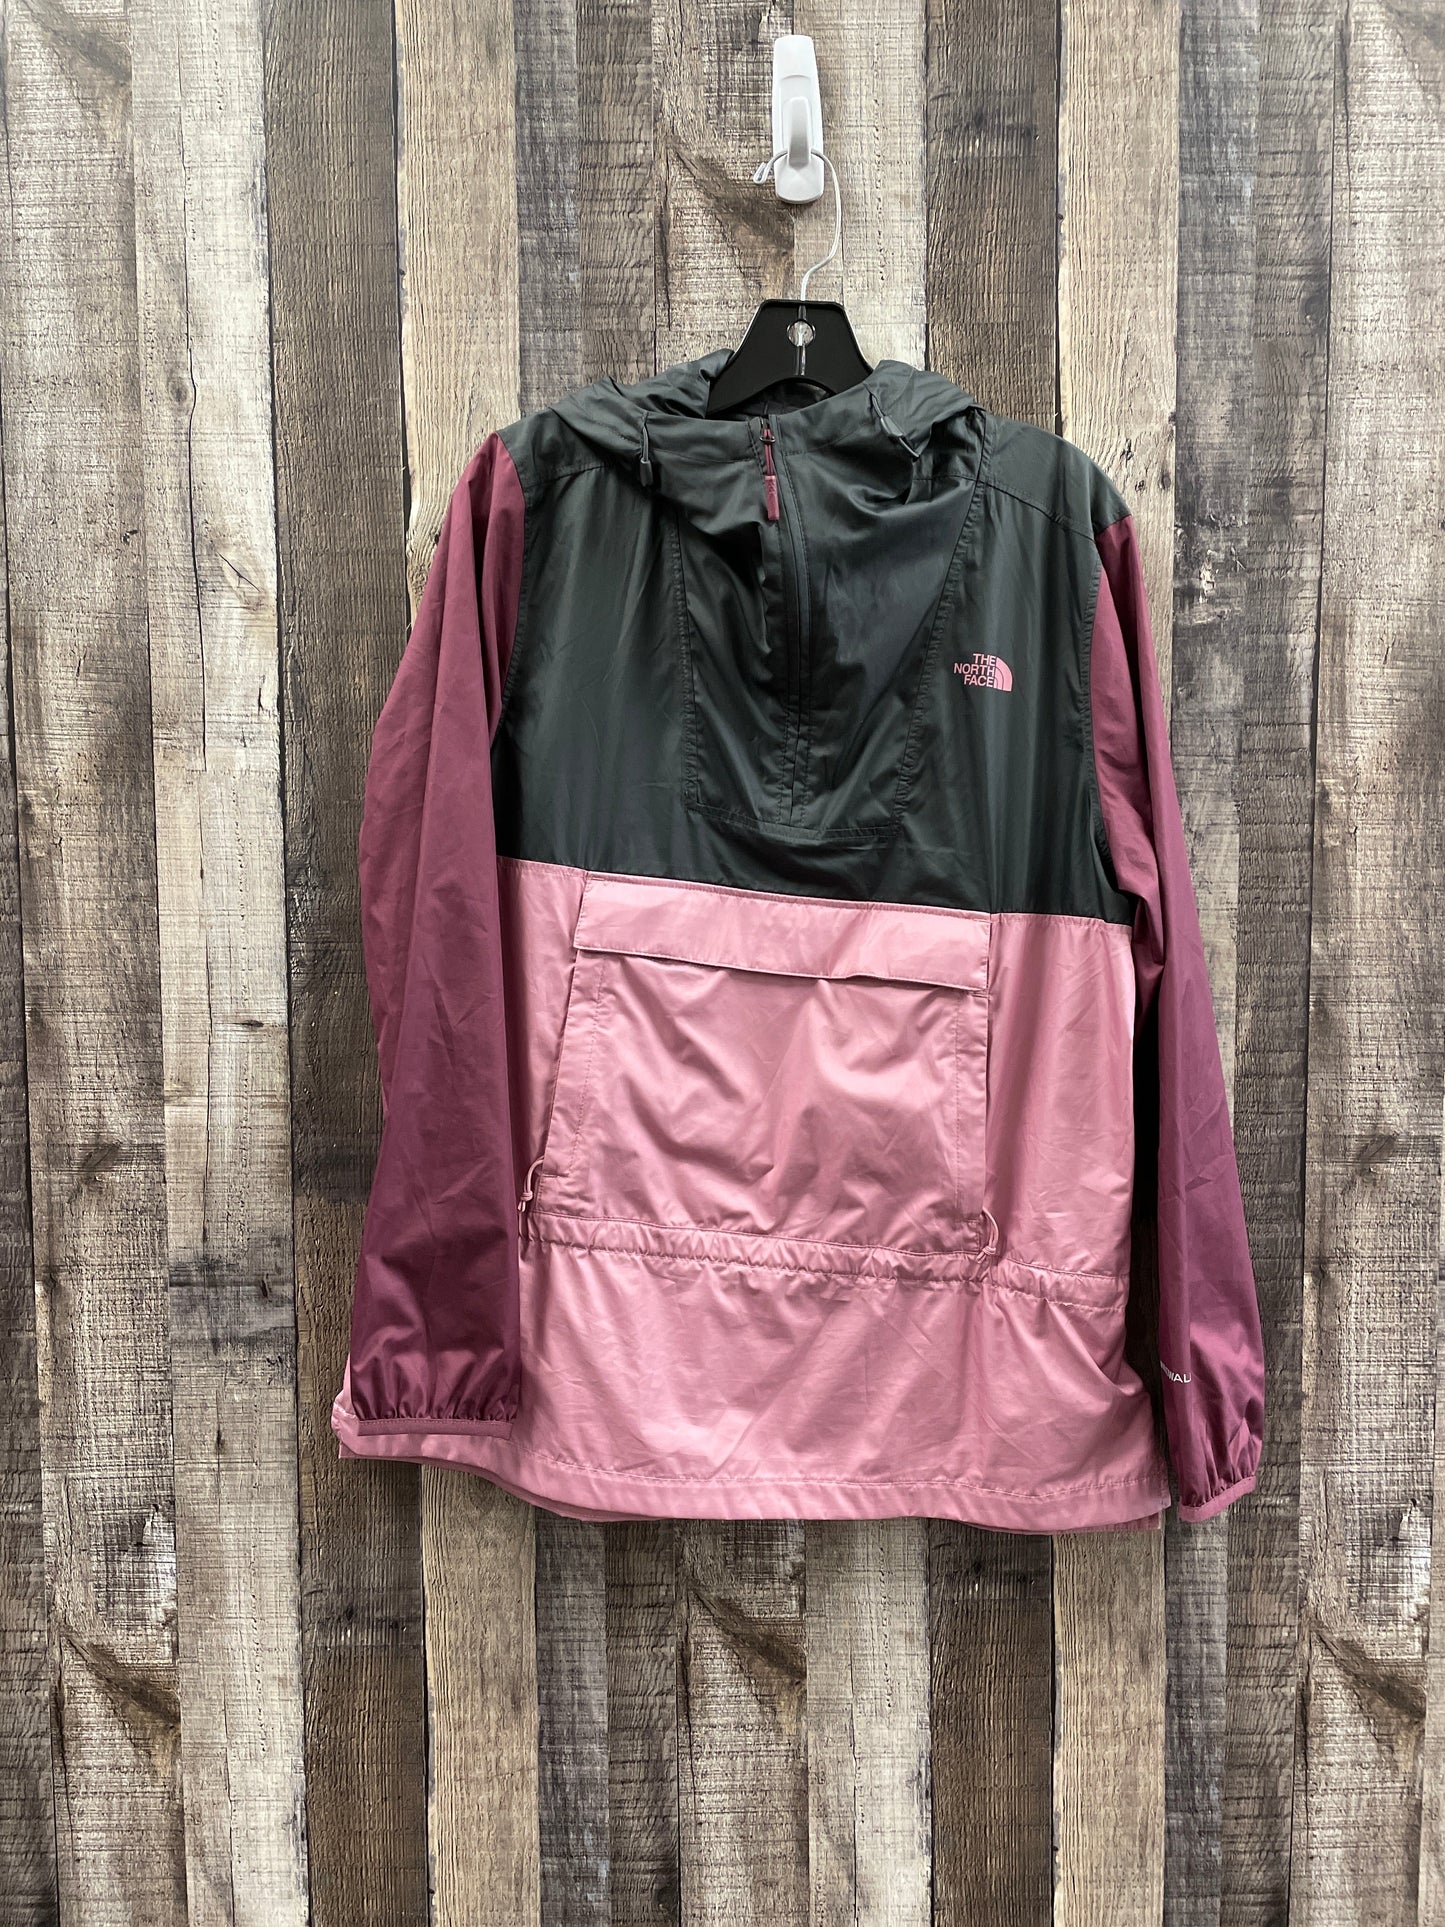 Grey & Pink Jacket Windbreaker The North Face, Size M